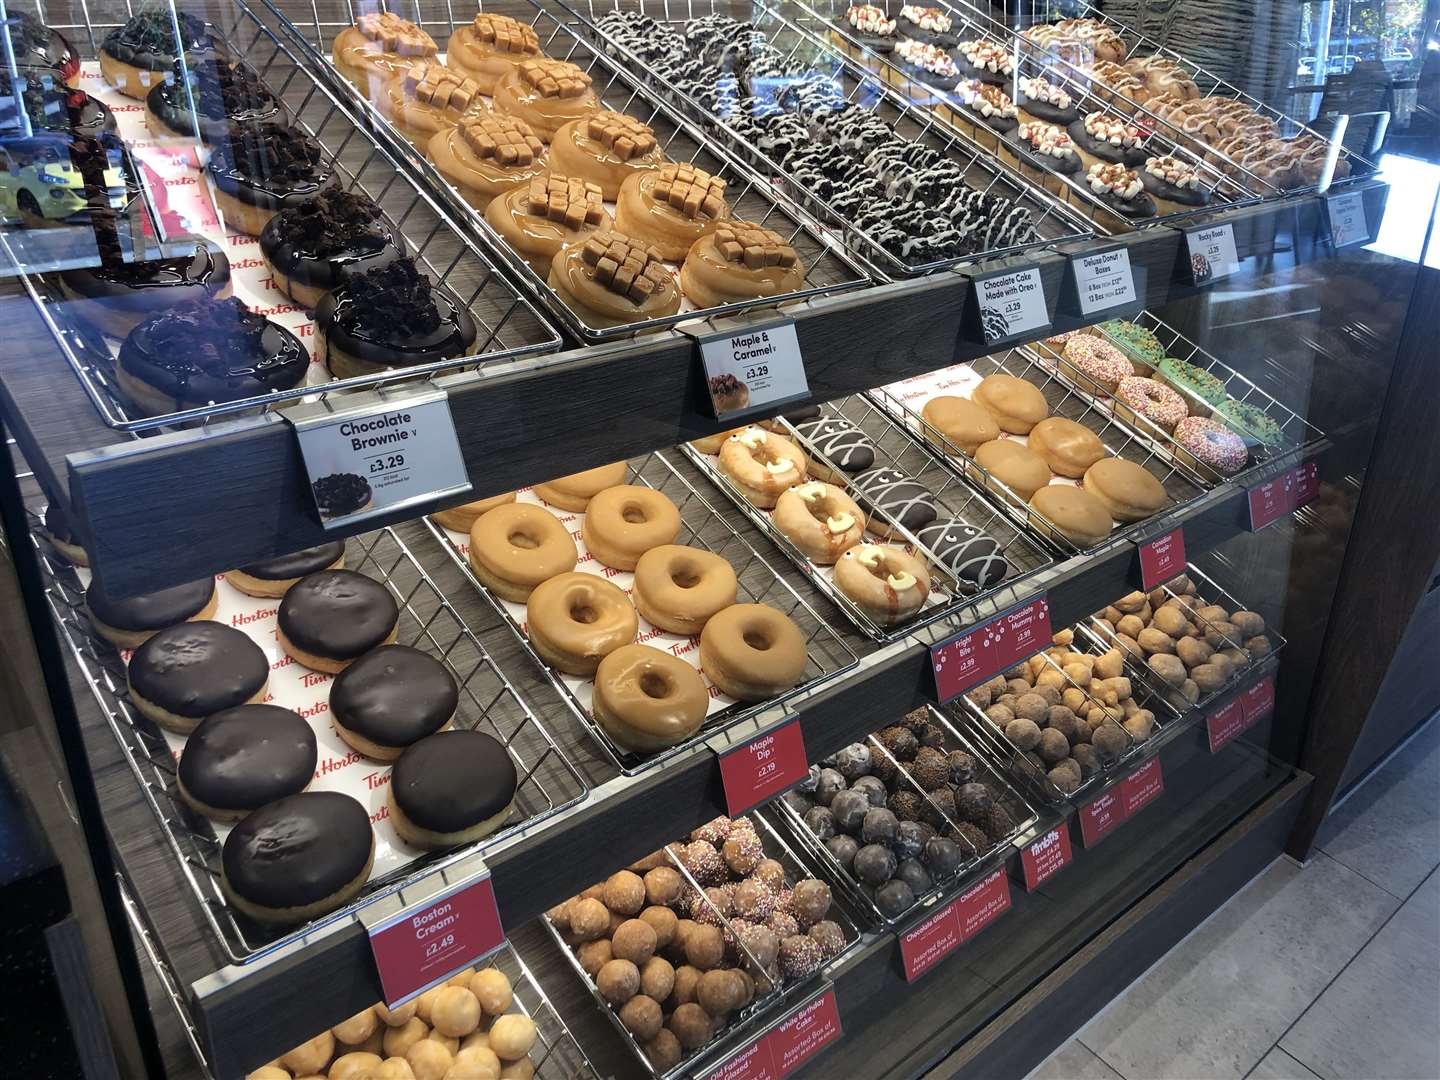 Doughnuts are baked fresh and have a range of flavours